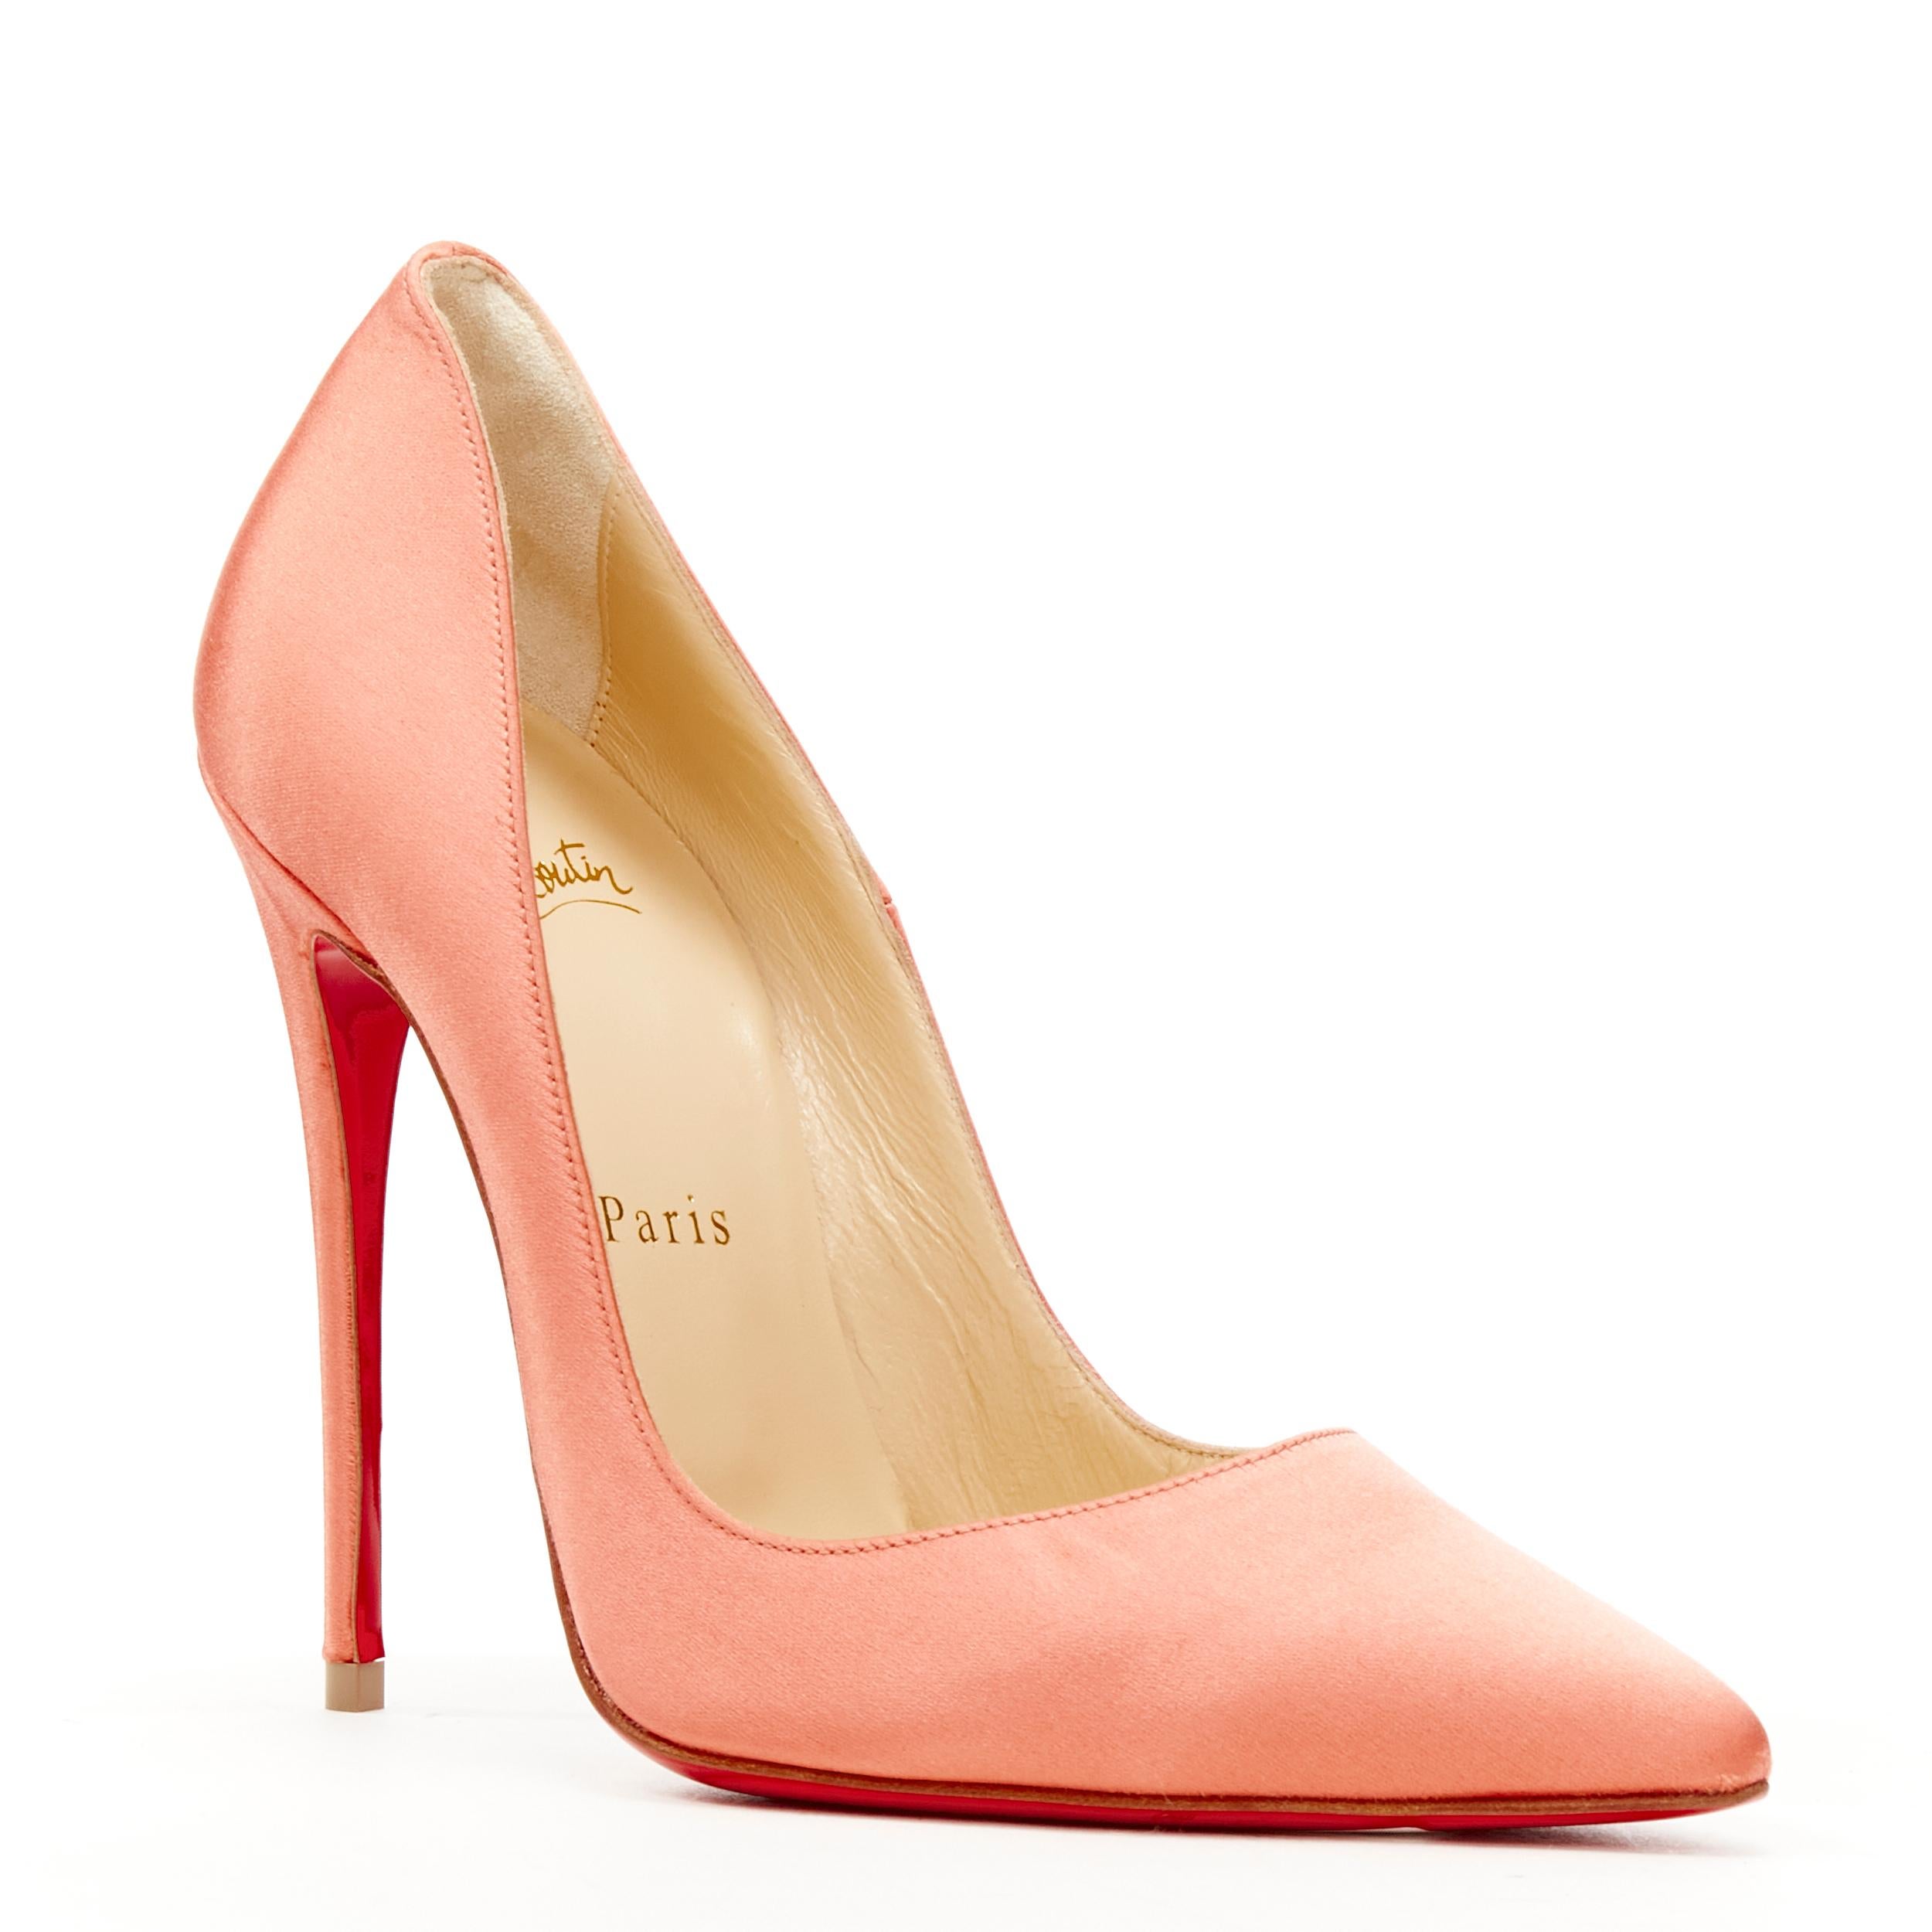 new CHRISTIAN LOUBOUTIN So Kate 120 Charlotte pink satin stiletto pump EU36 
Reference: TGAS/C01125 
Brand: Christian Louboutin 
Designer: Christian Louboutin 
Model: So Kate 120 
Material: Satin 
Color: Pink 
Pattern: Solid 
Made in: Italy